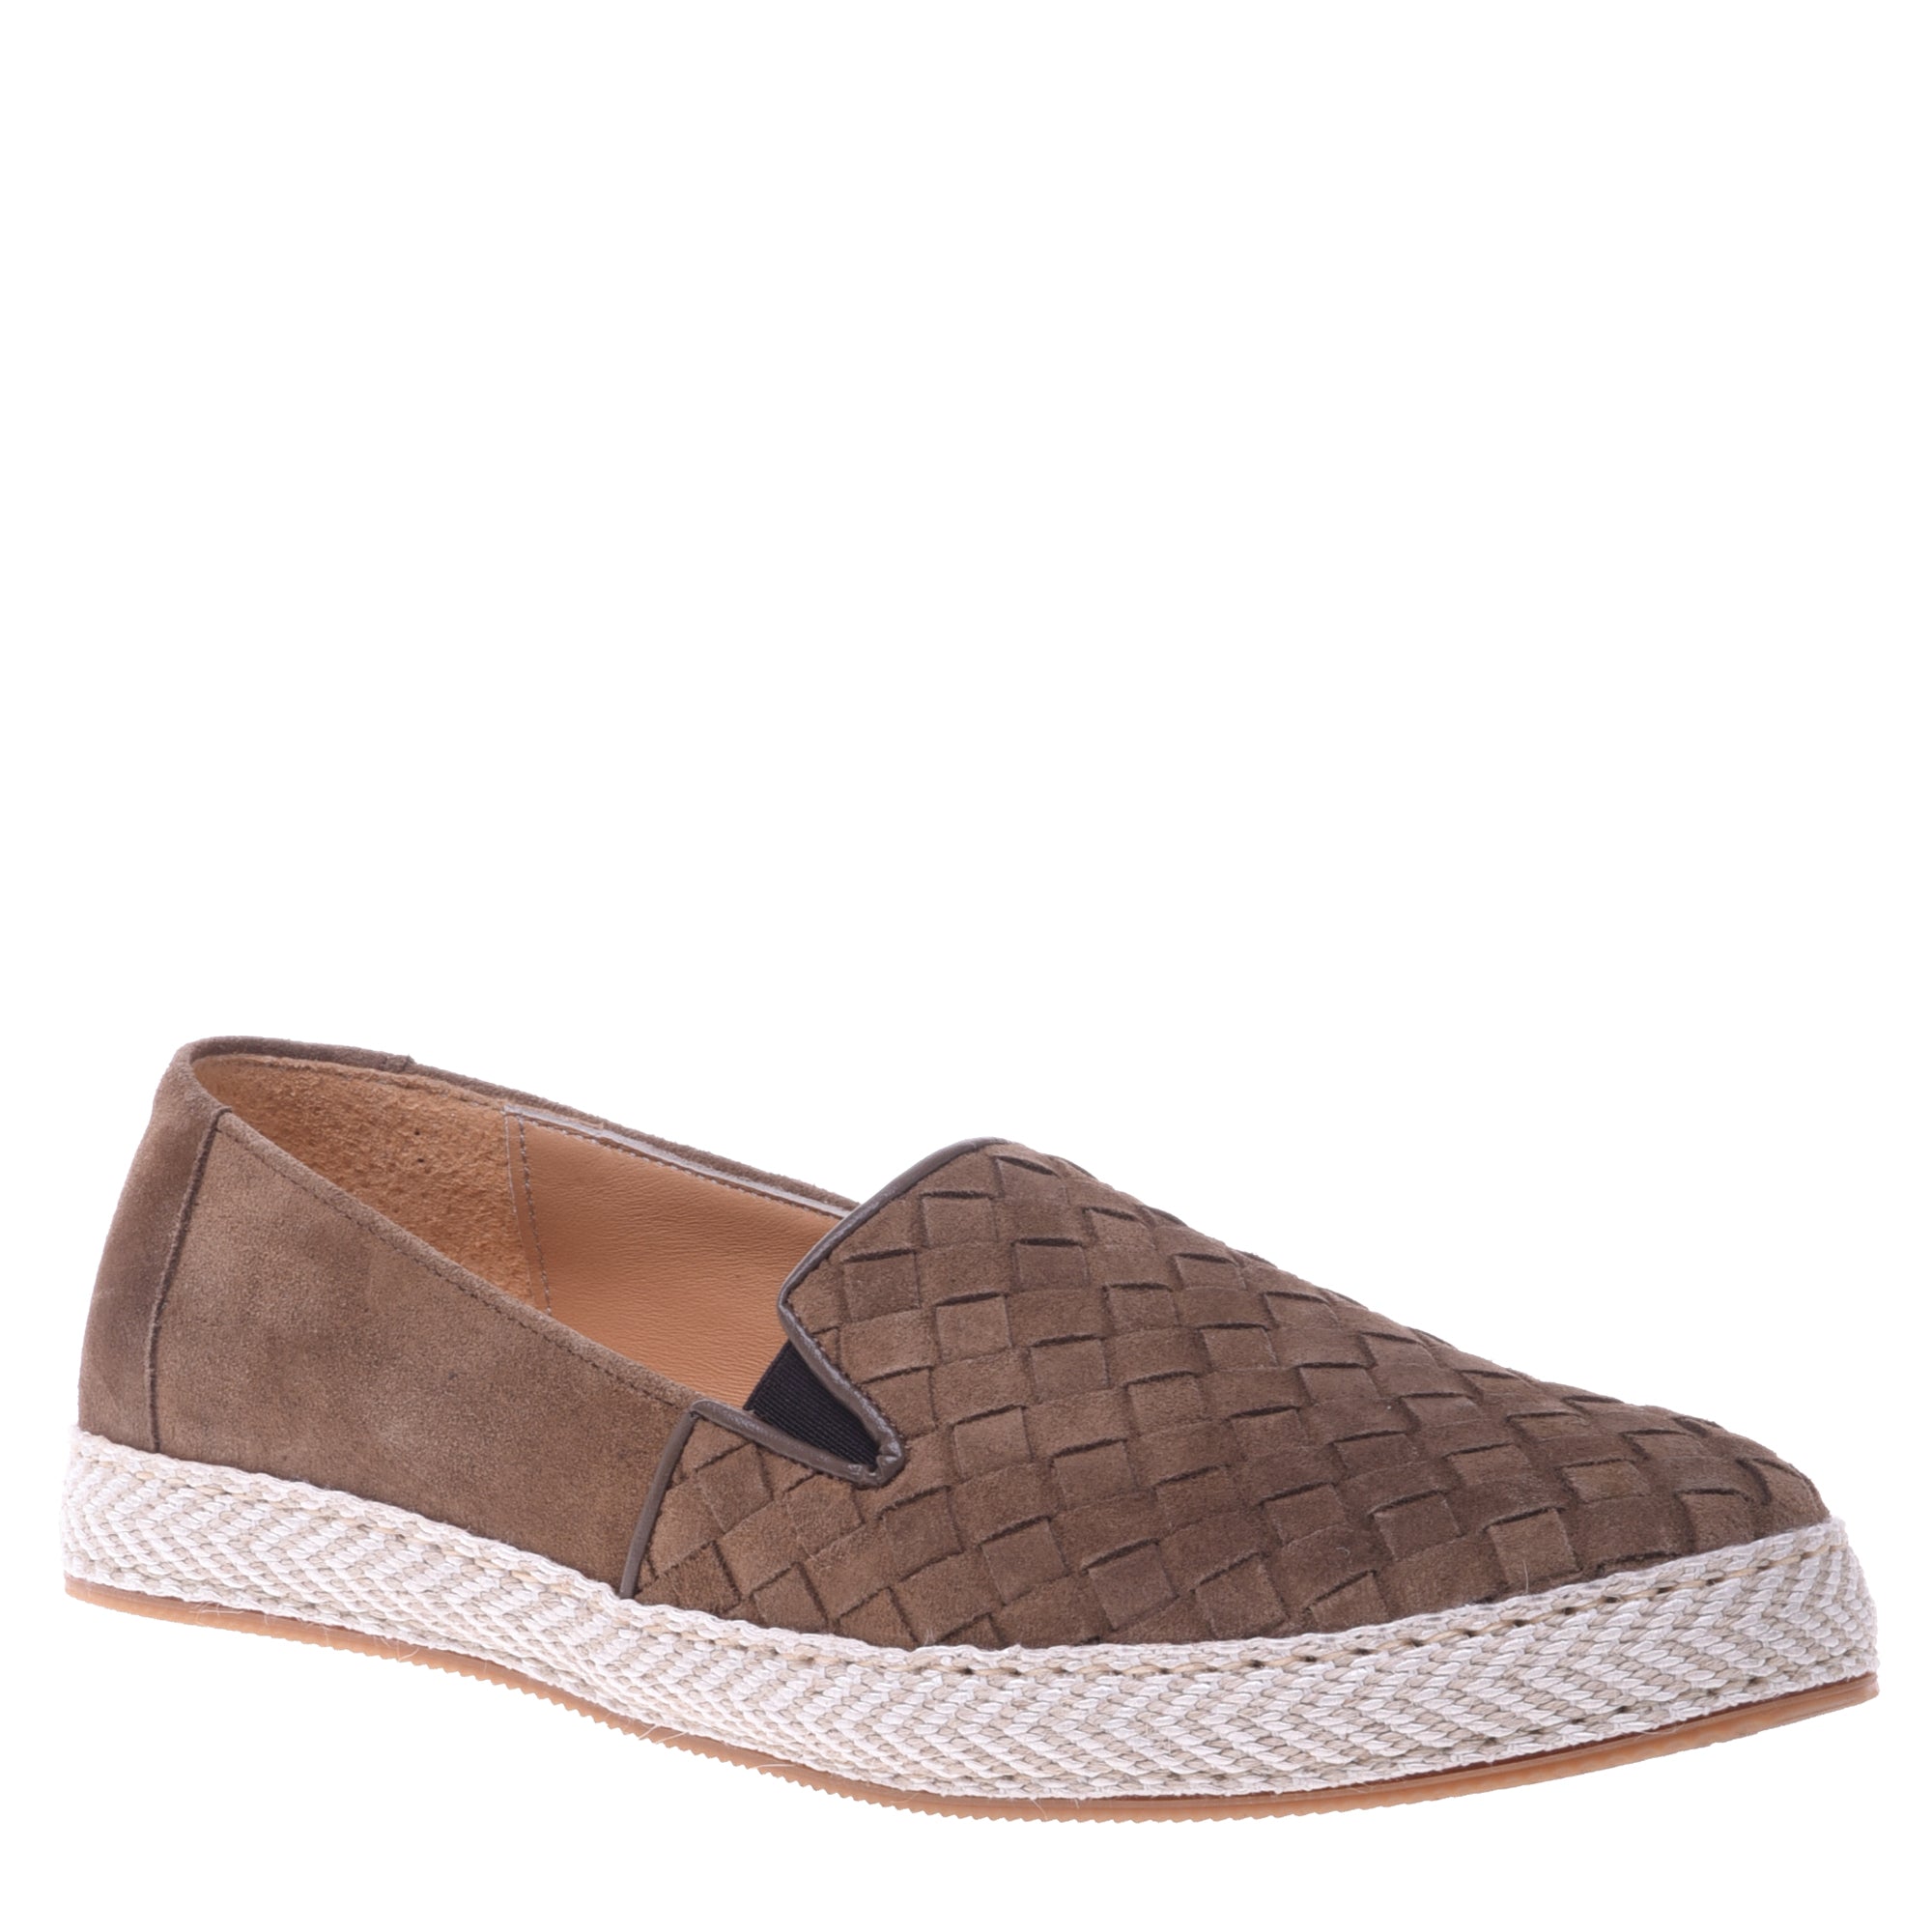 Espadrilles in taupe woven suede